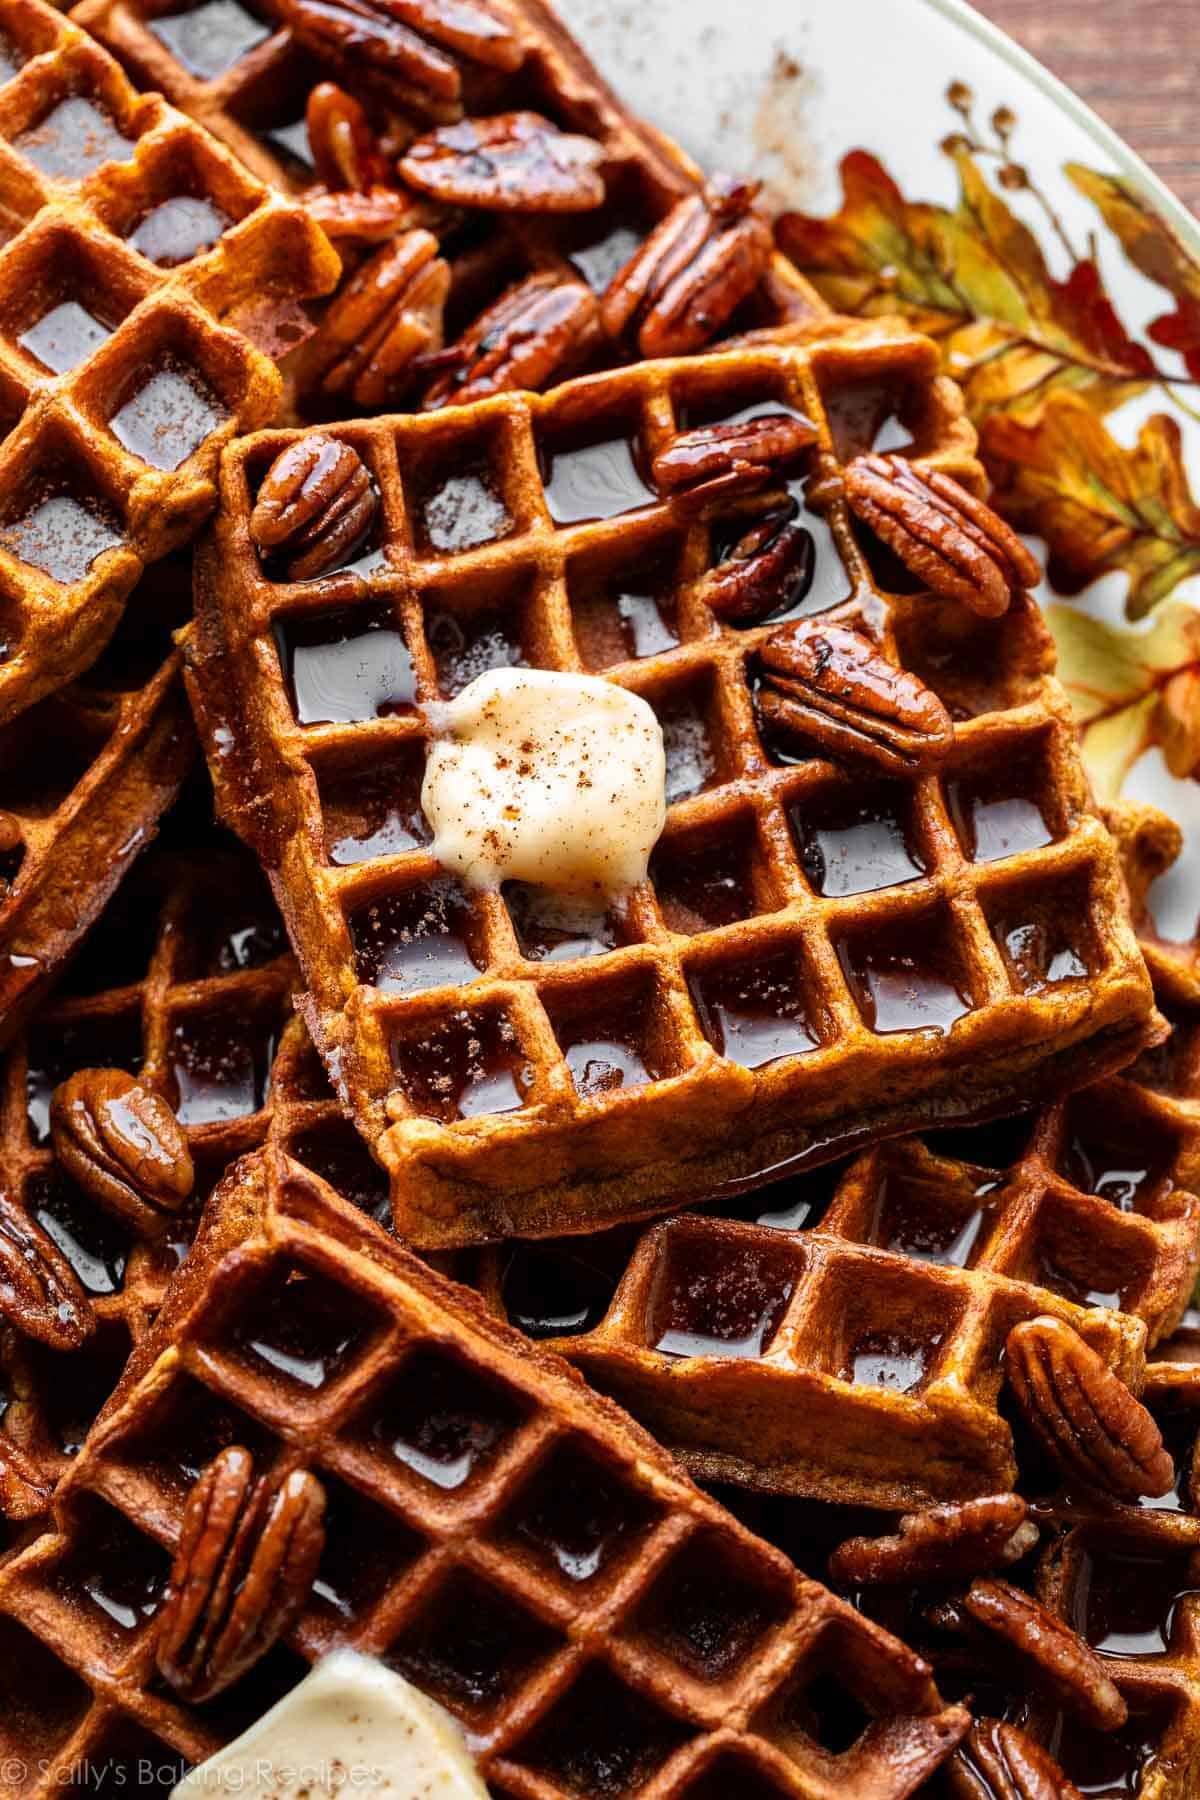 20 unique waffle makers you didn't know you could buy - Reviewed